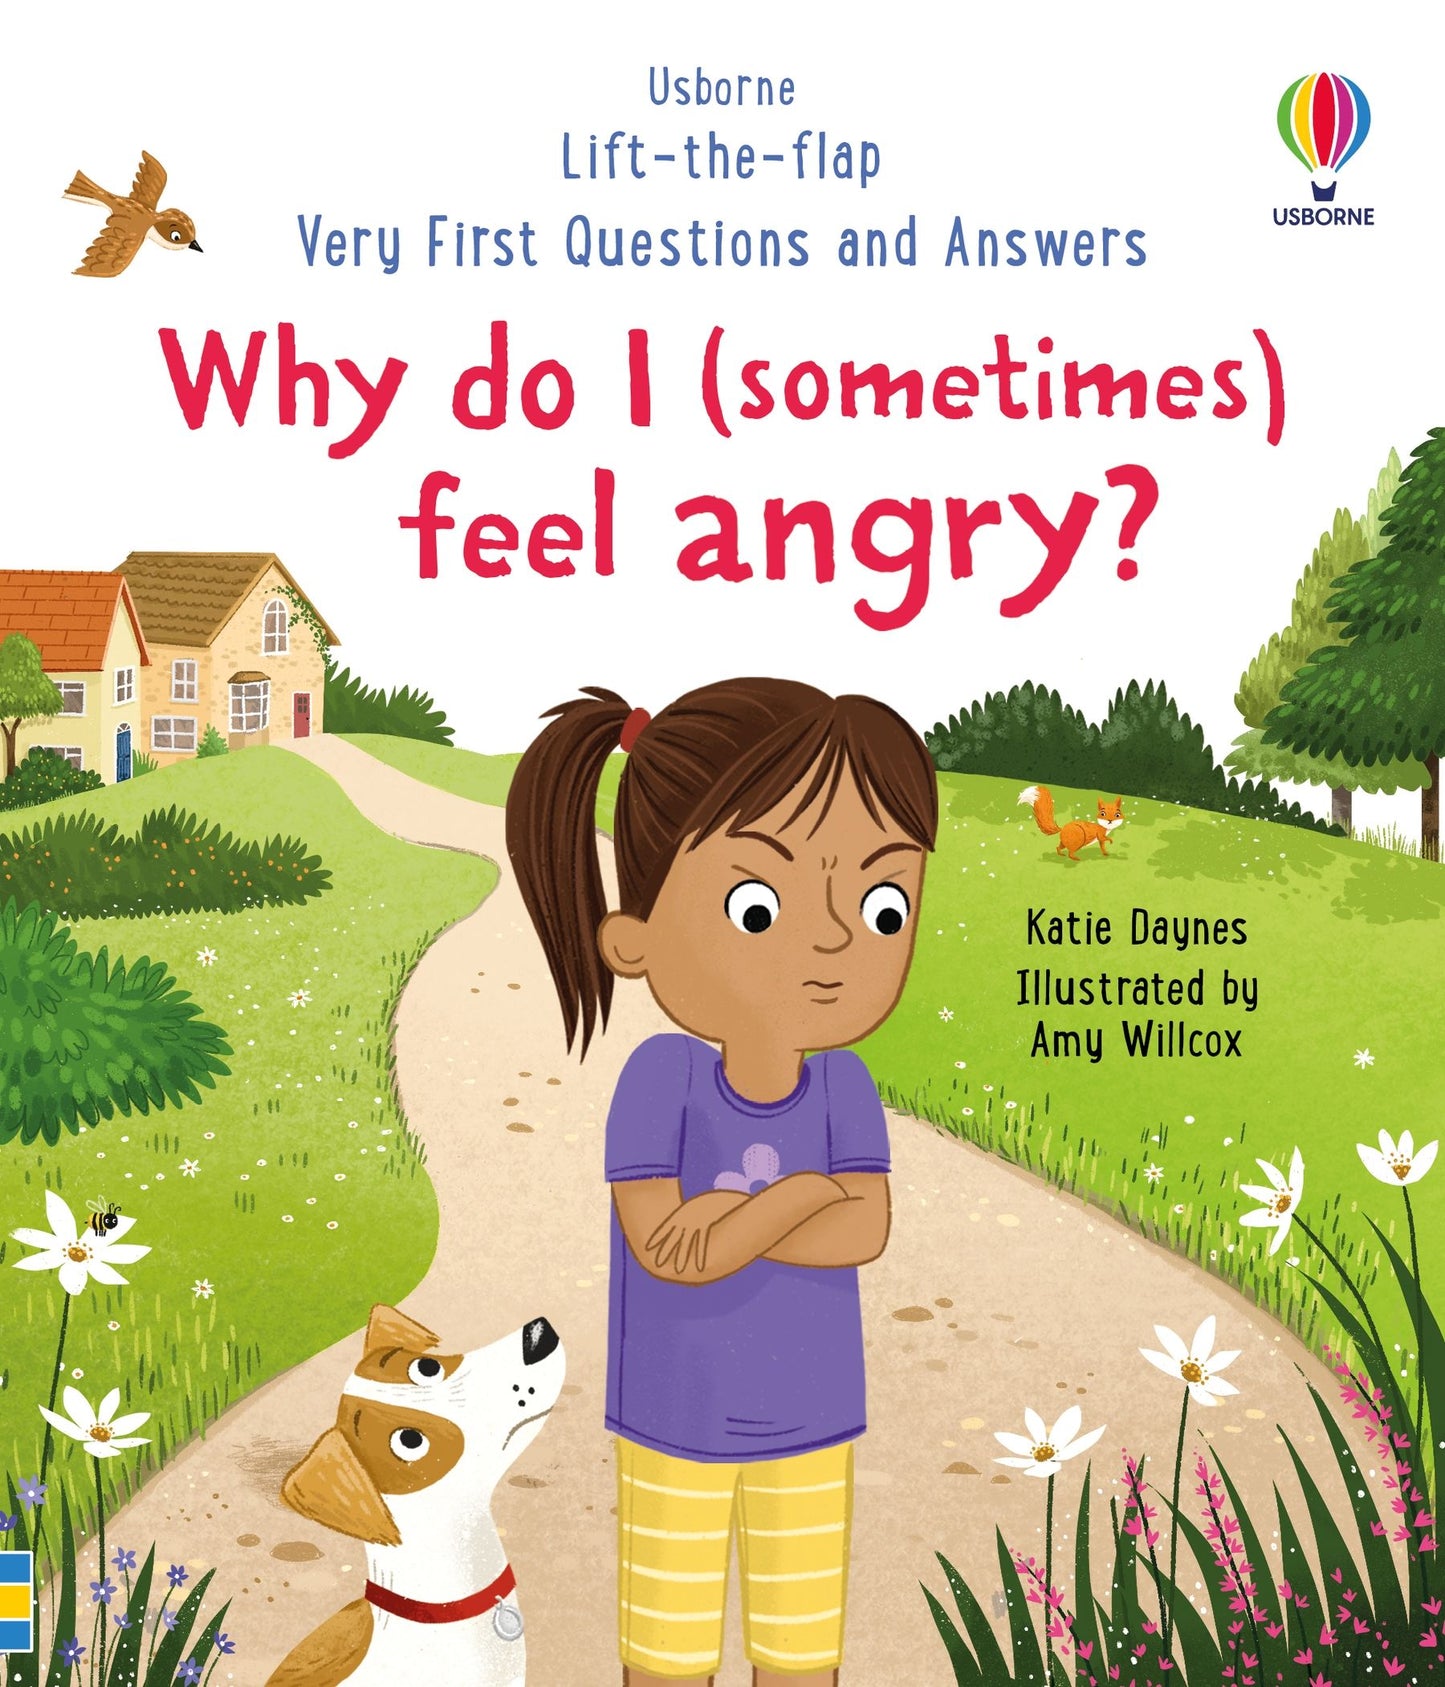 Very First Questions and Answers: Why do I (sometimes) feel Angry? 為什麼我（有時）會感到生氣？